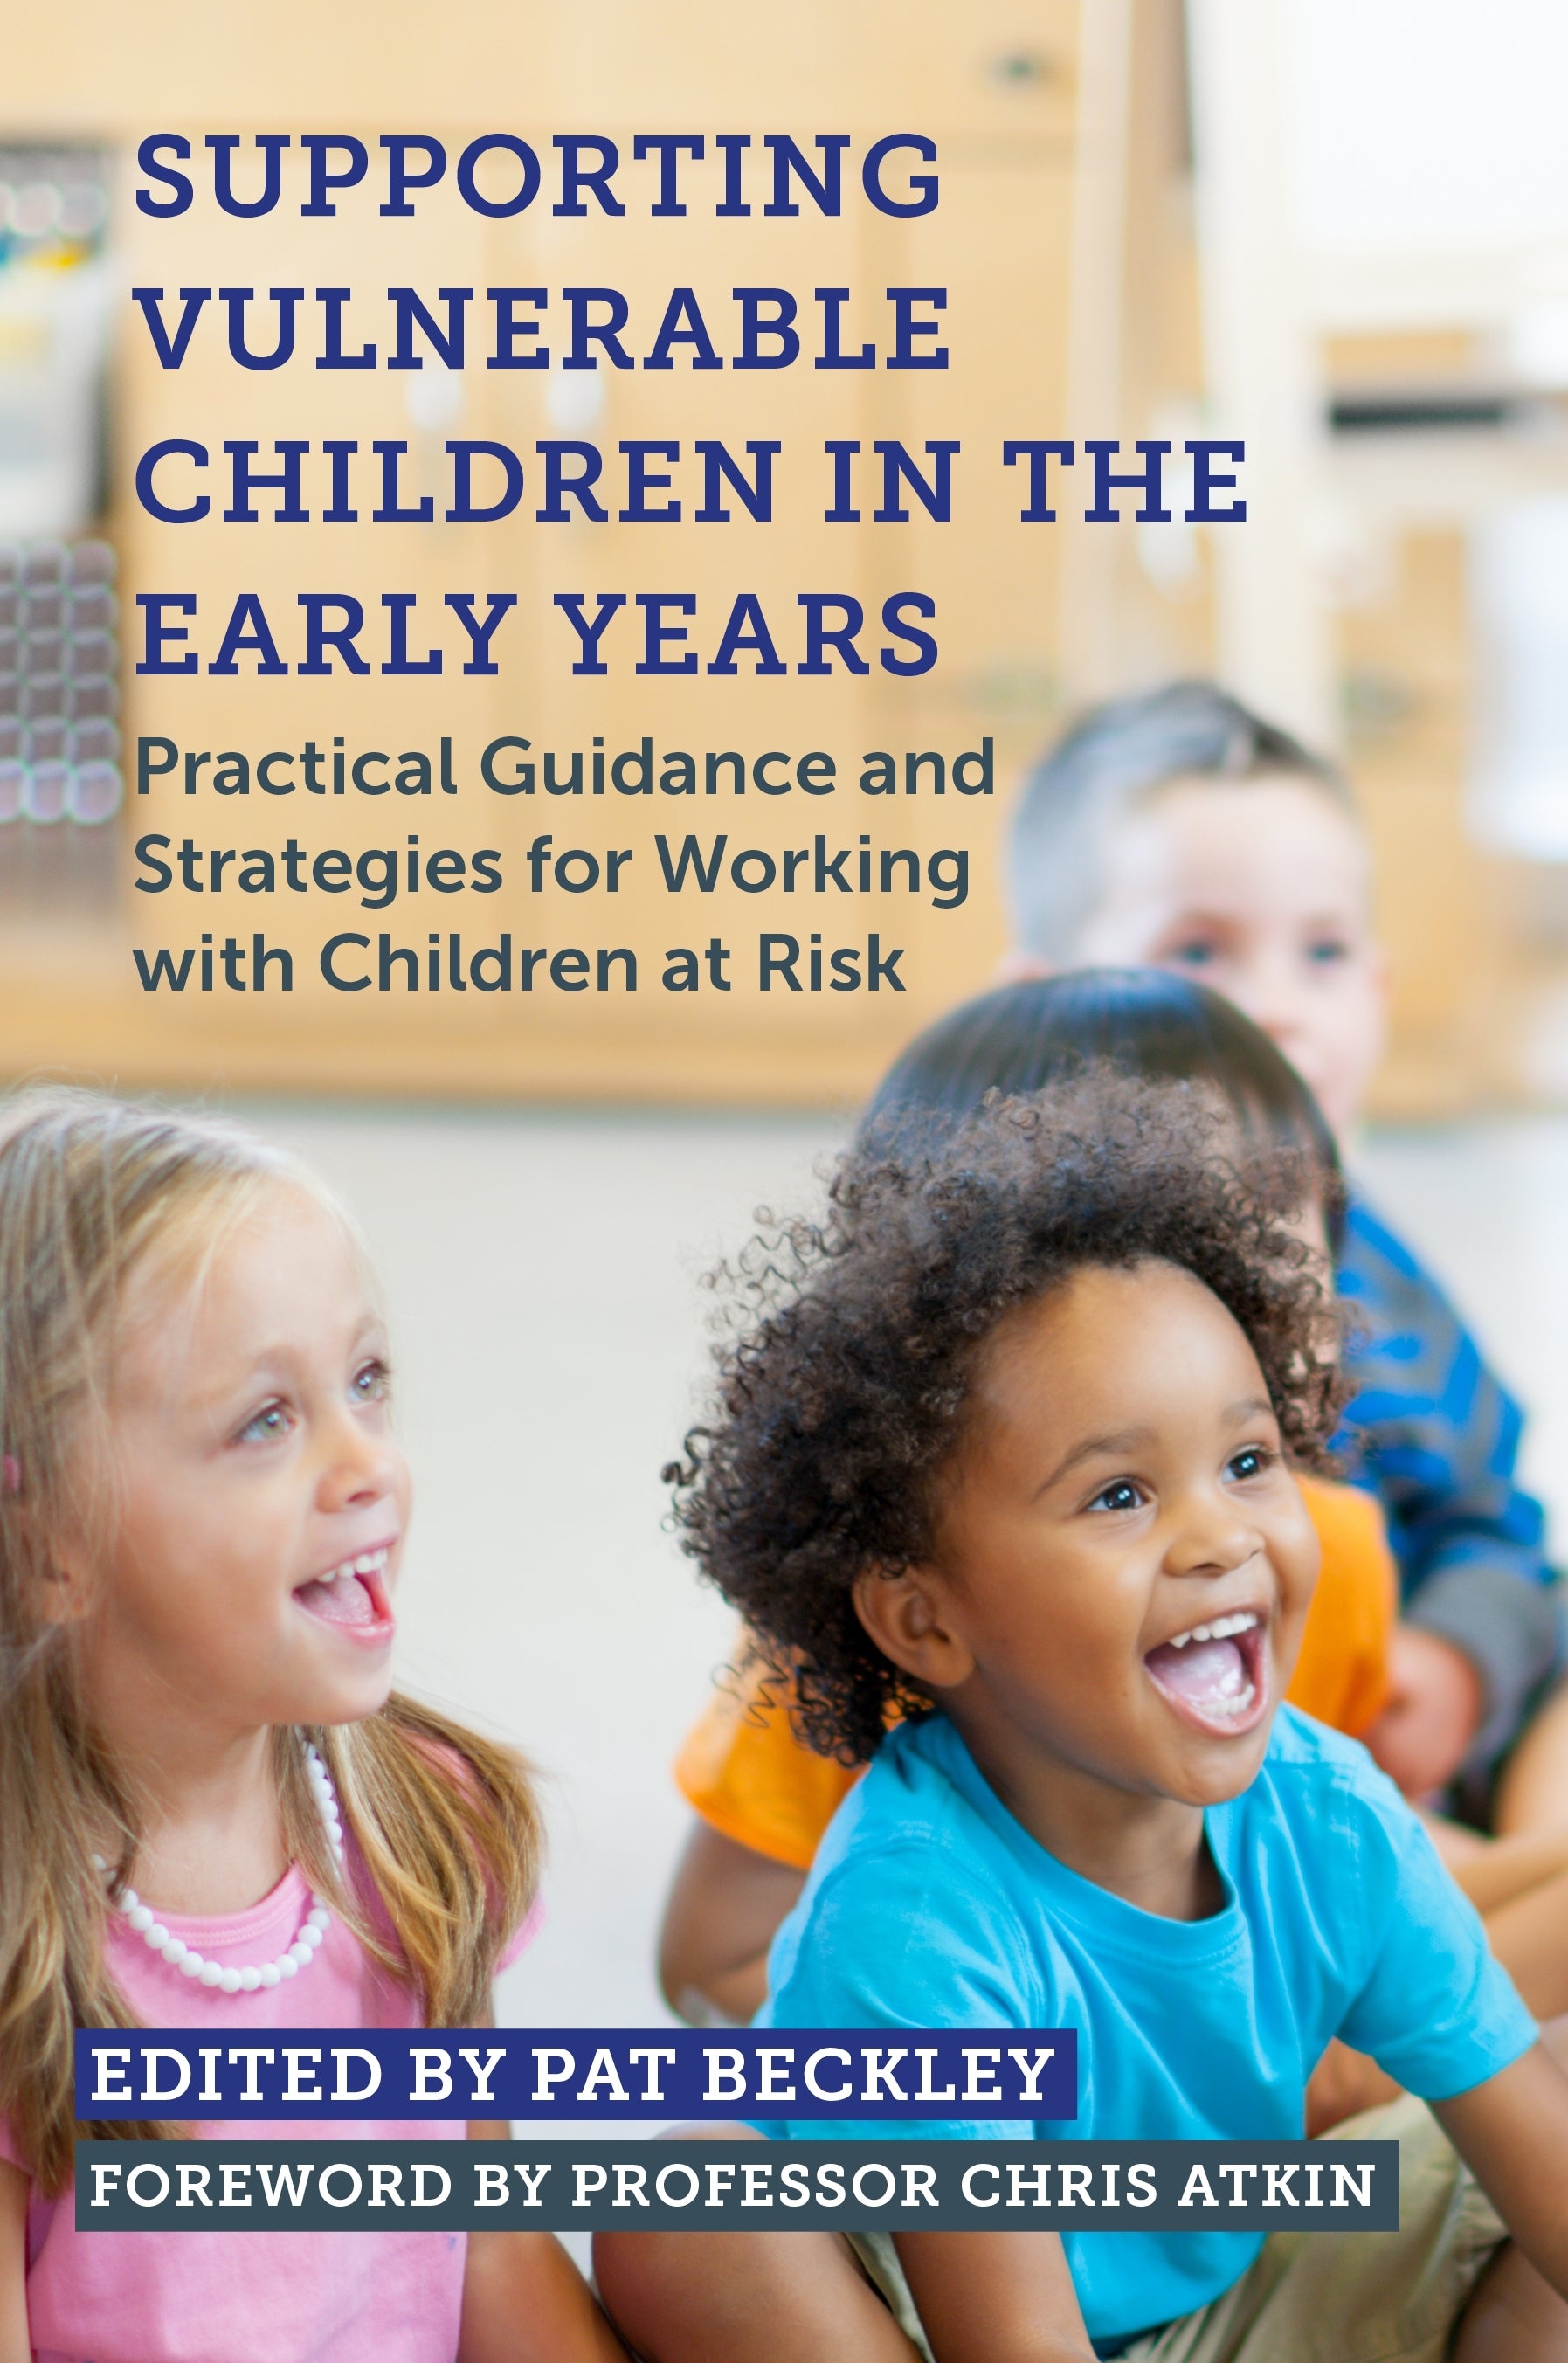 Supporting Vulnerable Children in the Early Years by No Author Listed, Pat Beckley, Professor Chris Atkin